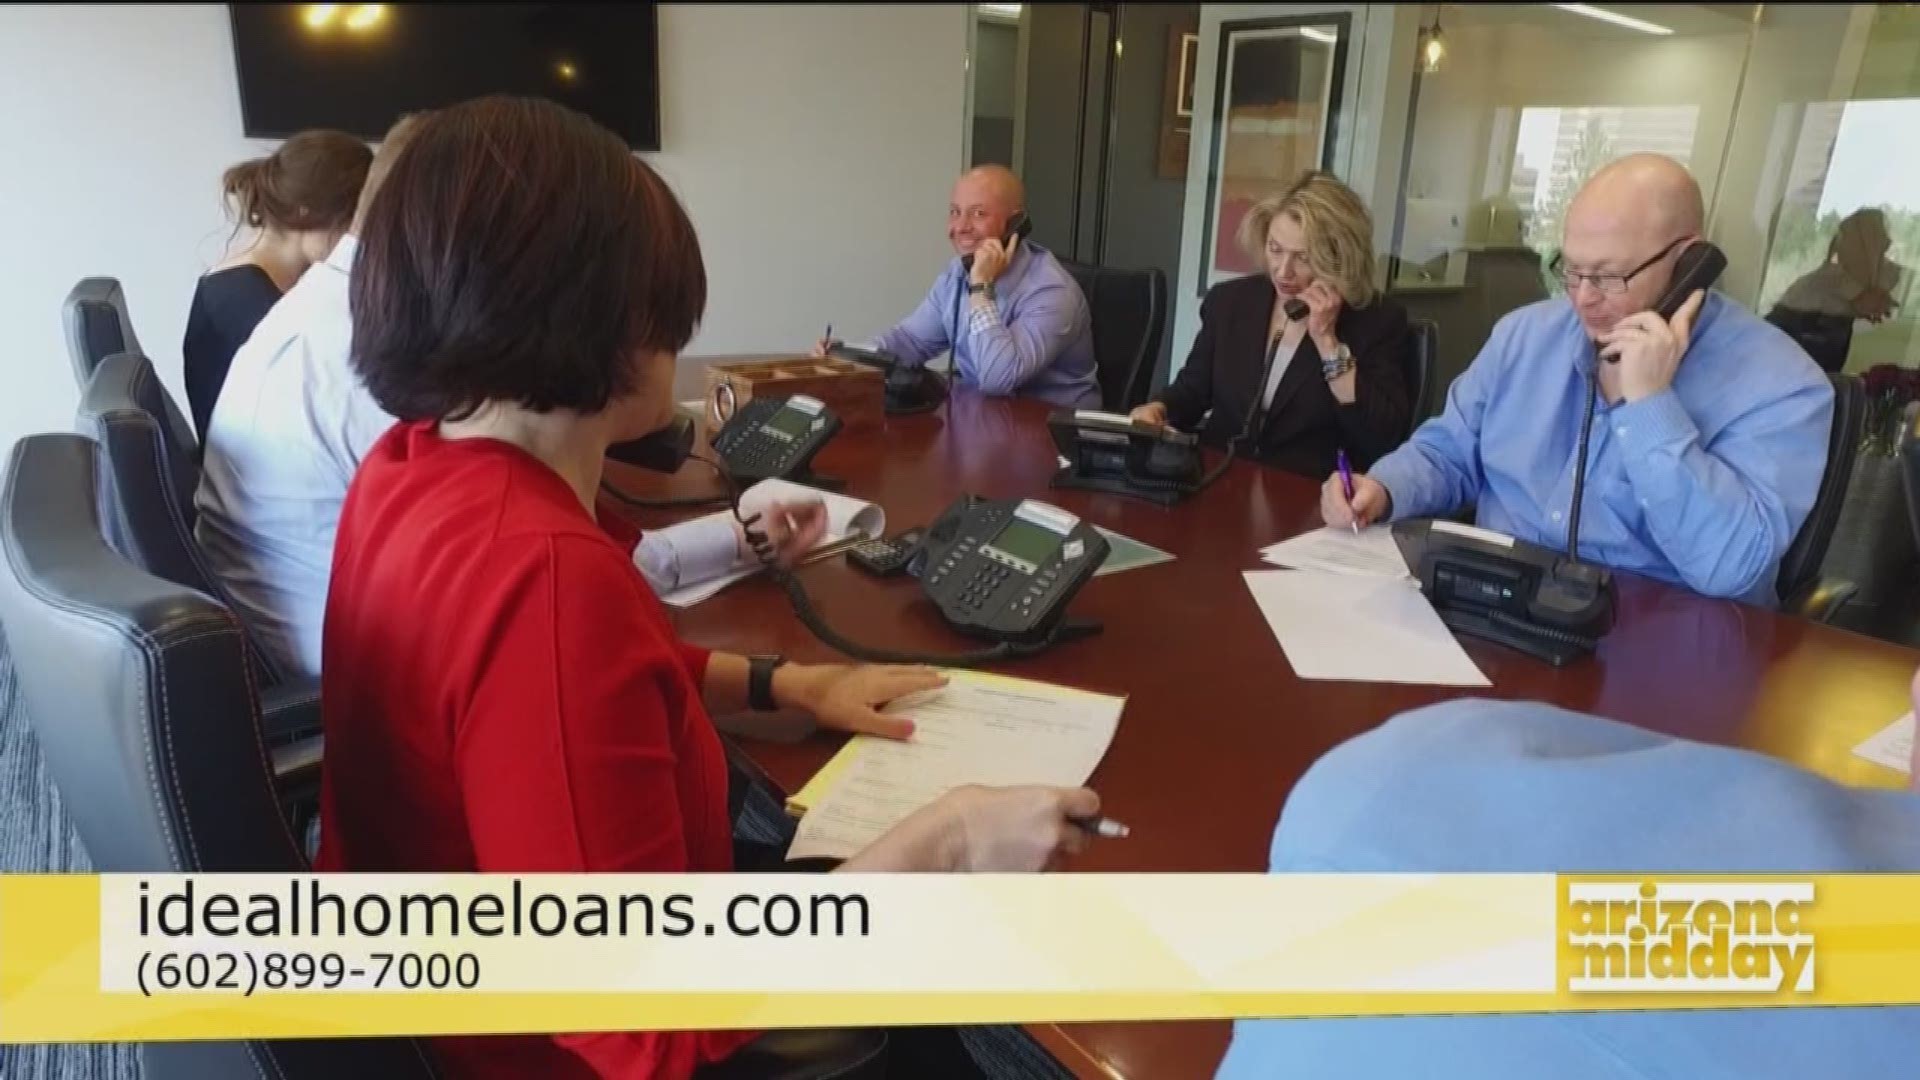 Brent Ivinson with Ideal Home Loans explains how you can make the entire process of securing a home loan easier.